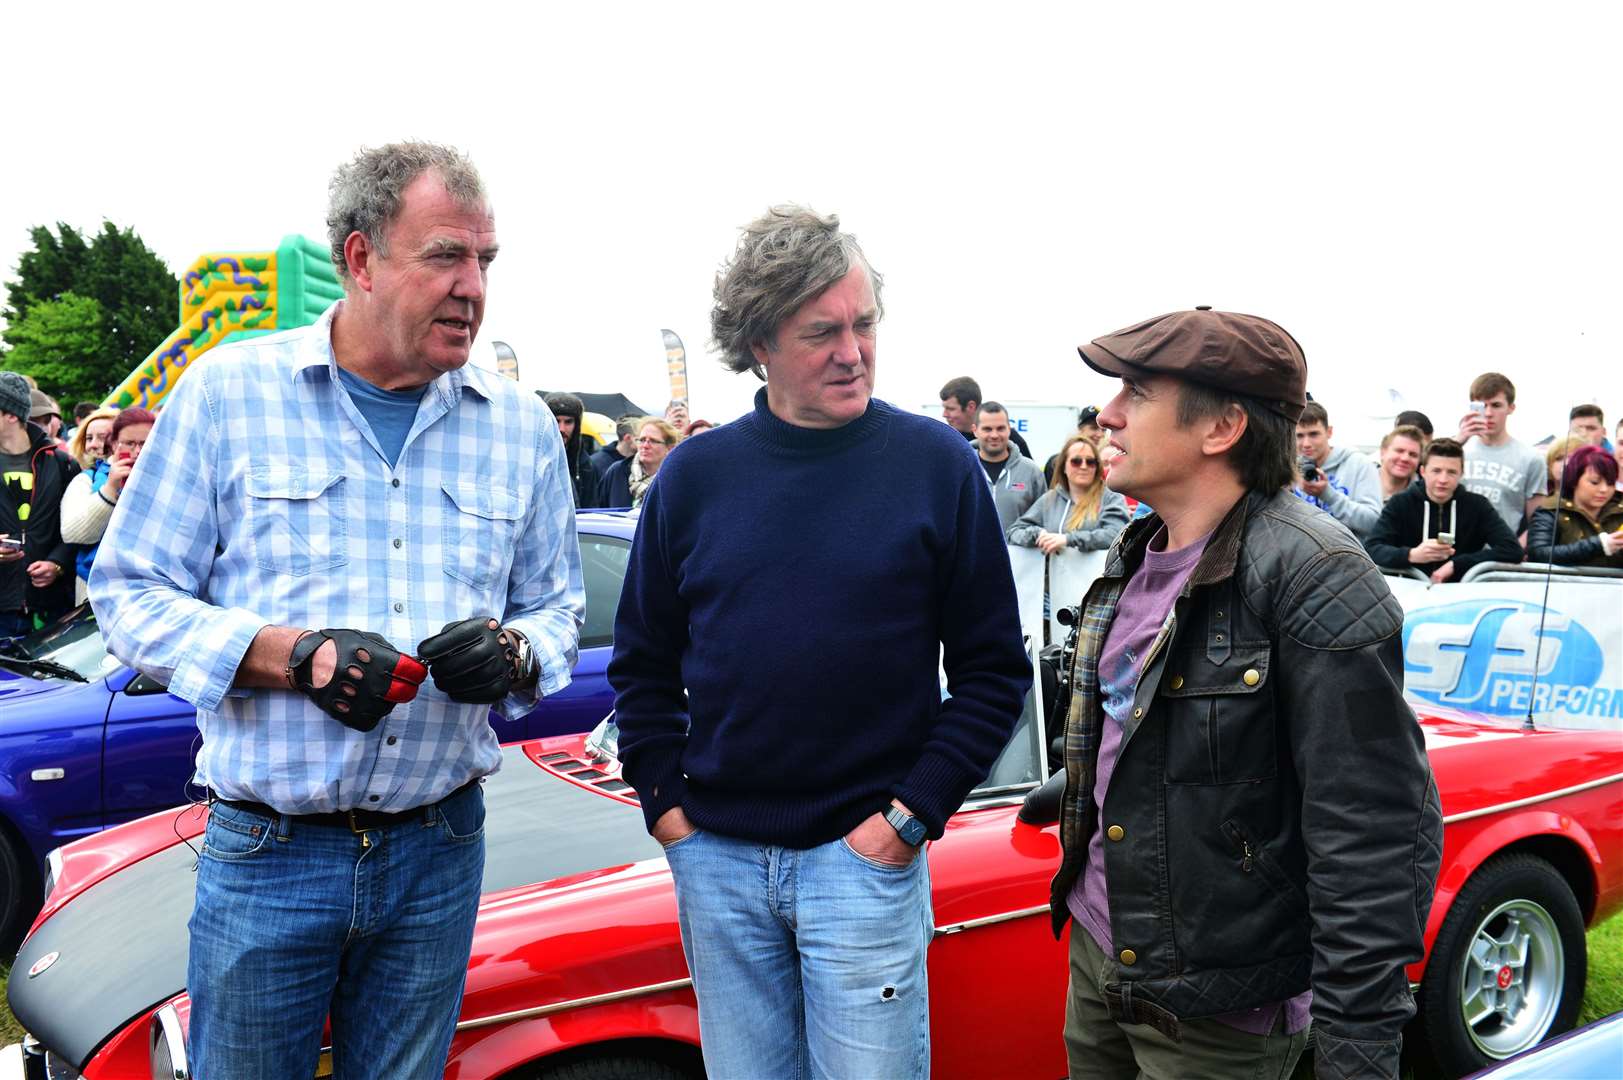 Jeremy Clarkson with former Top Gear co-hosts James May and Richard Hammond (Ellis O’Brien/BBC/PA)